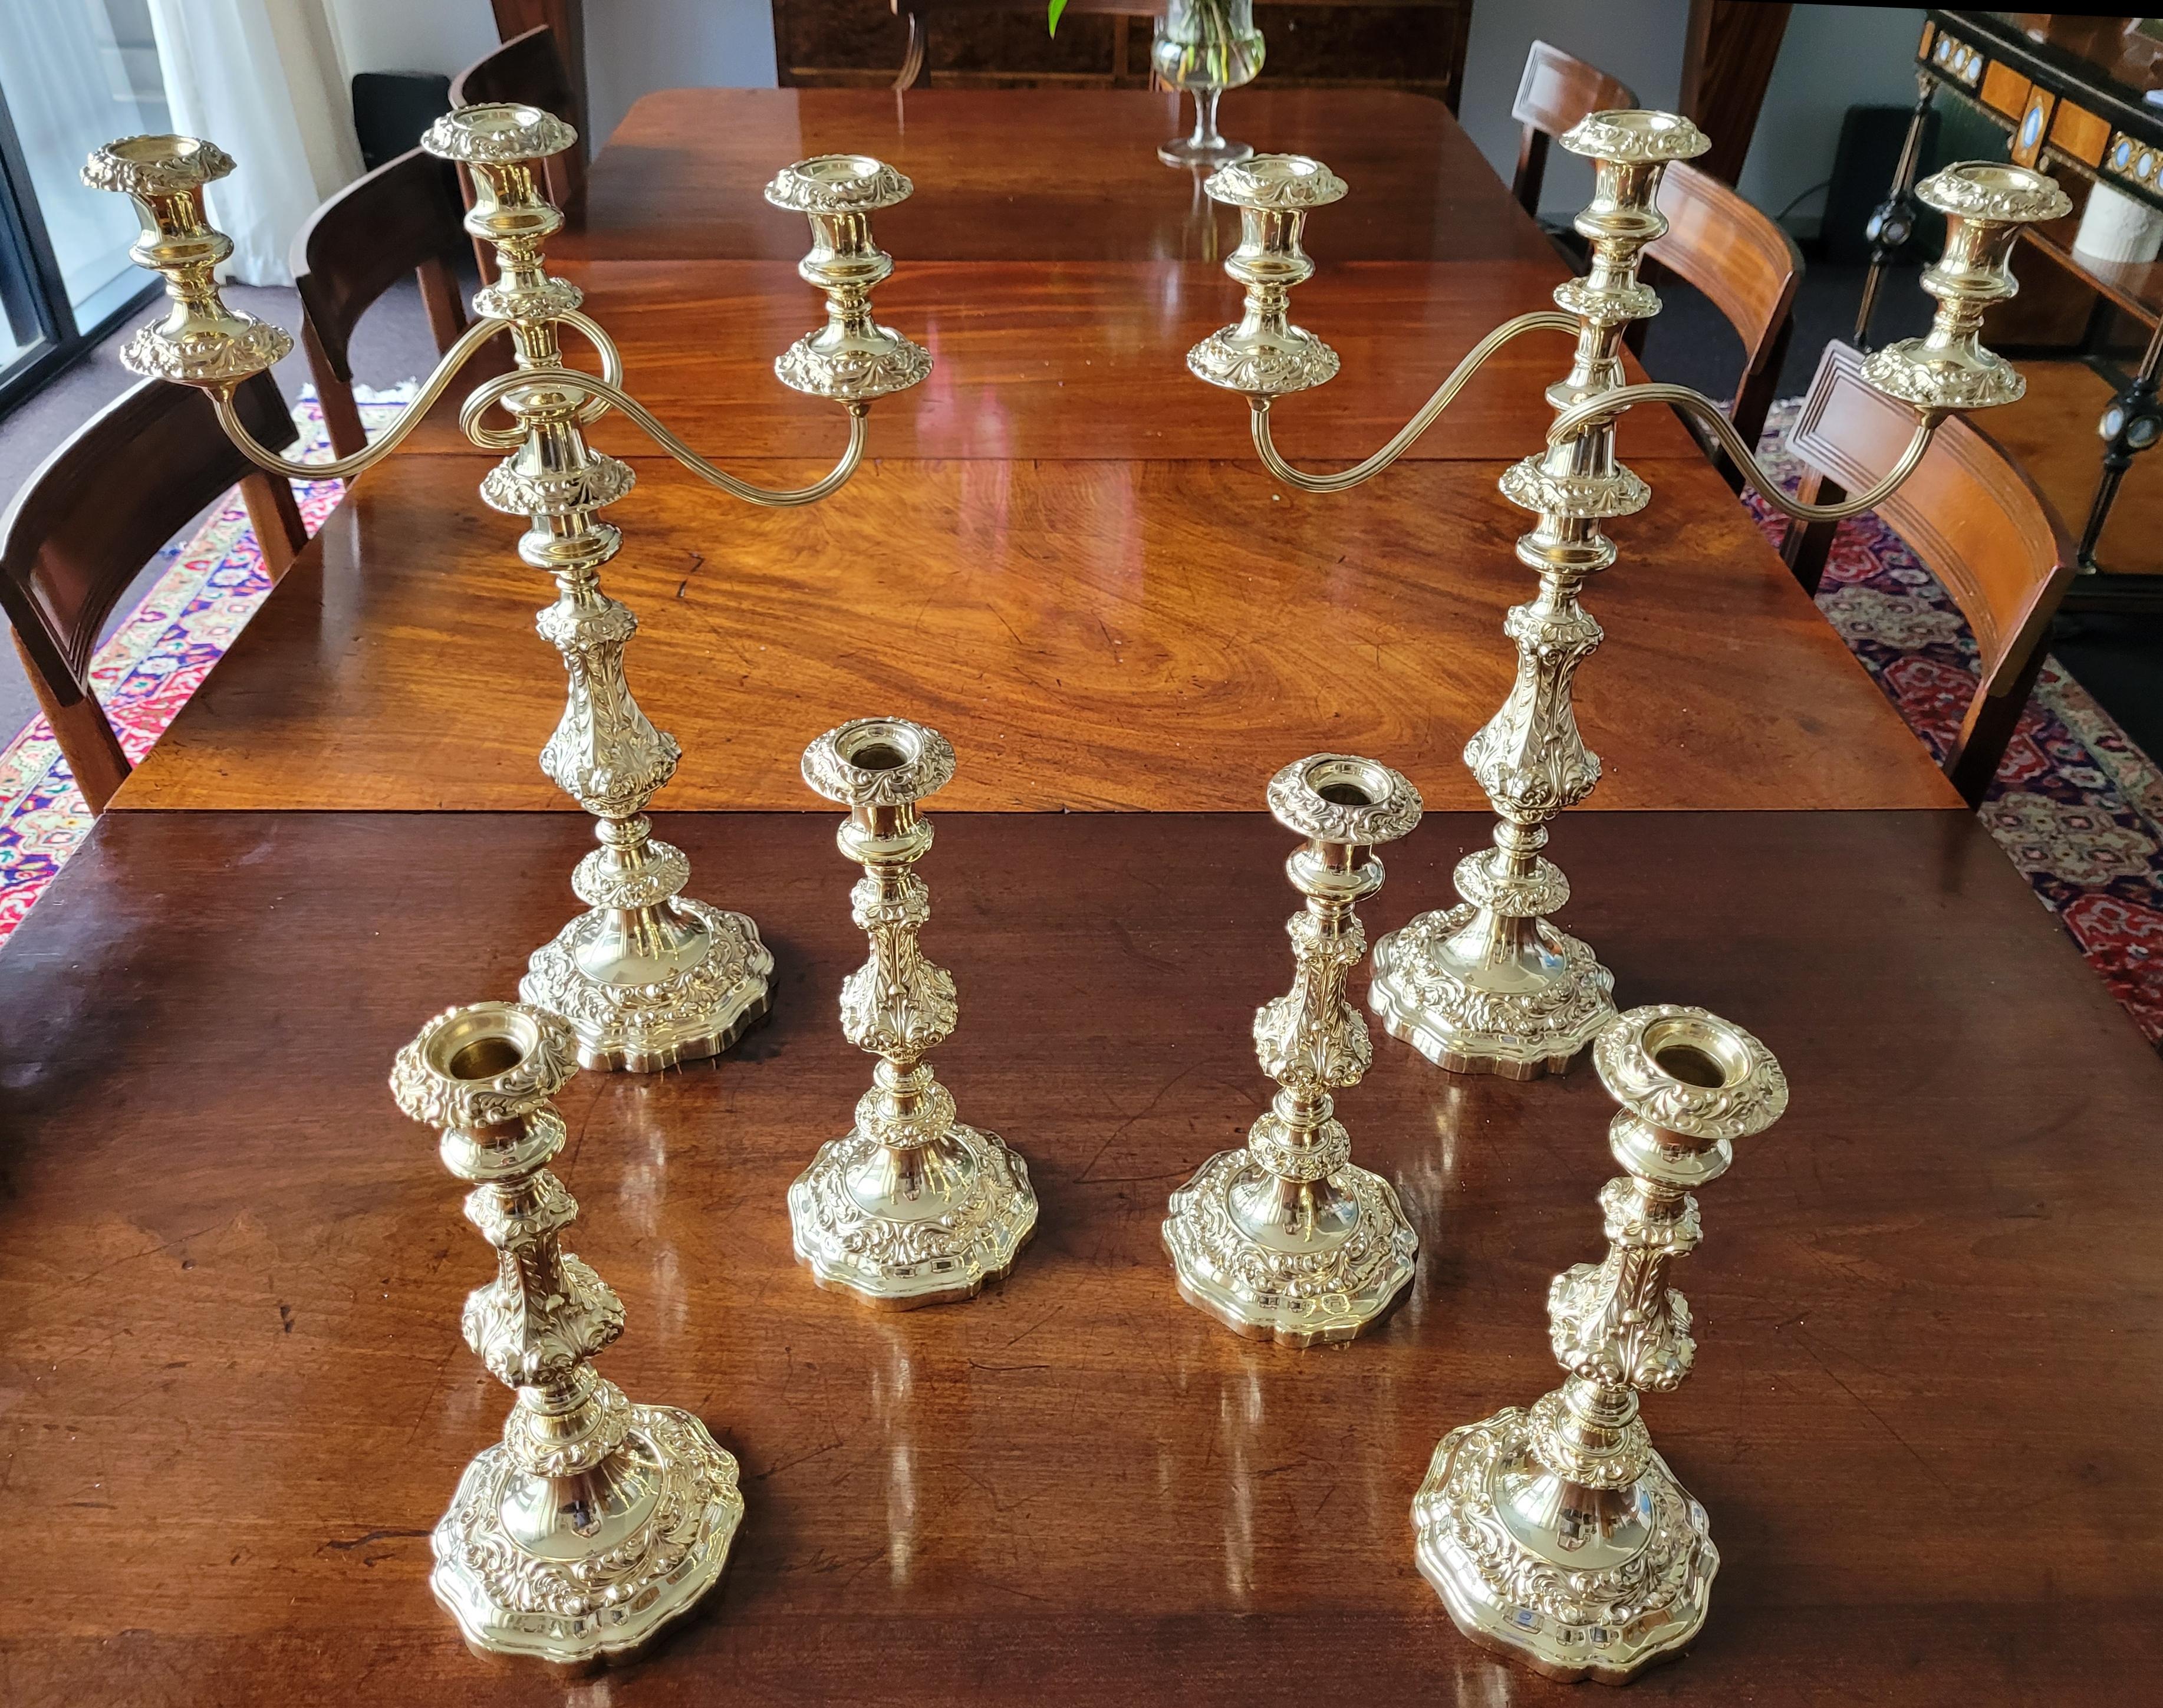 A magnificent gilt table set, consisting of two three-branch candelabra, and four single candlesticks. The candelabra can be converted to large single sticks by removing the arm. The bobeches are removable for easy cleaning.

The modelling and